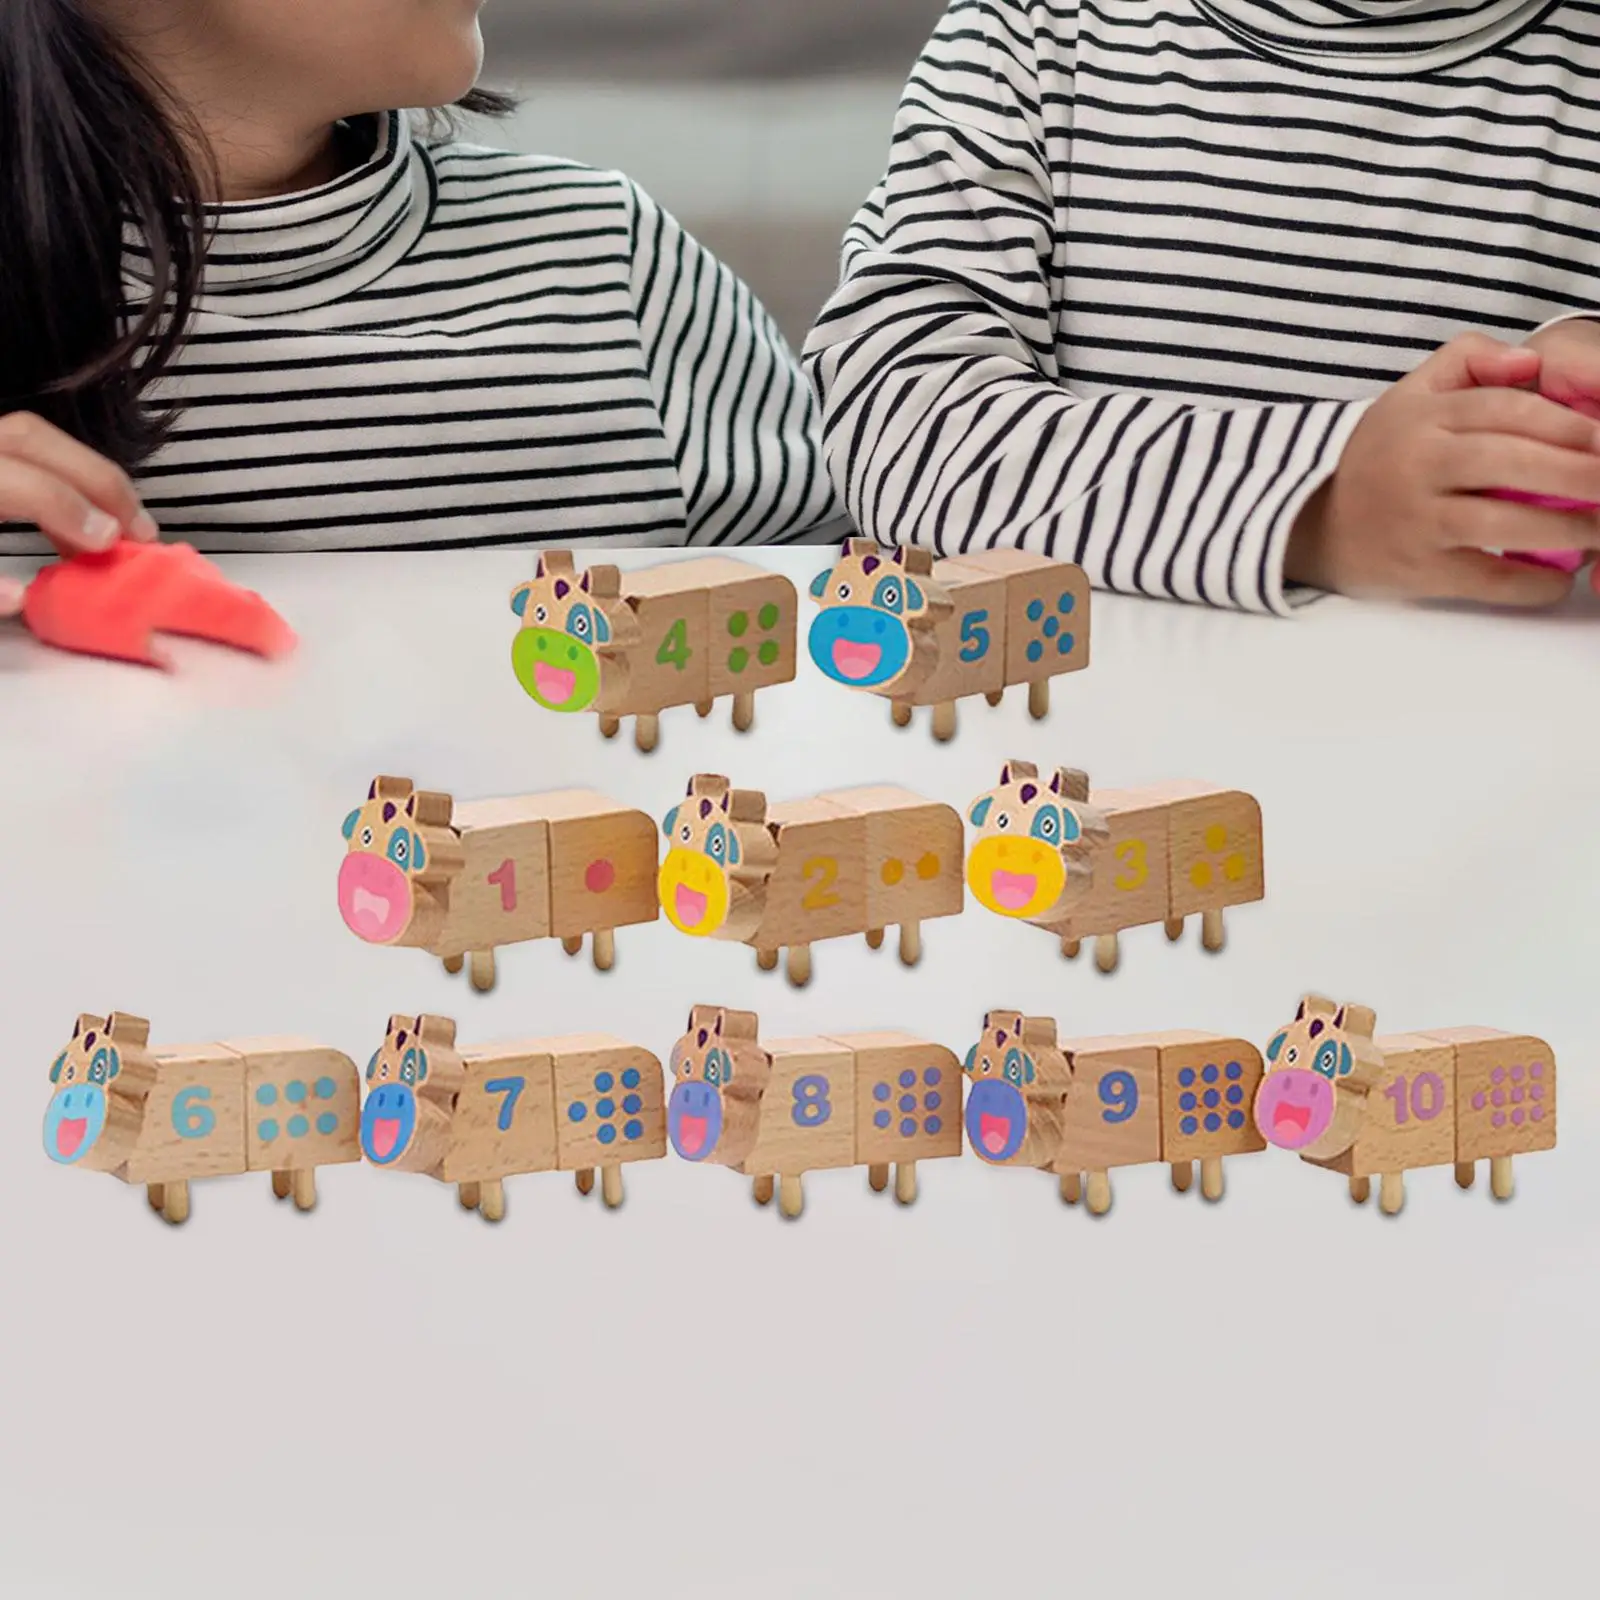 10x Wooden Building Blocks Educational Learning Toys for Boys Birthday Gifts